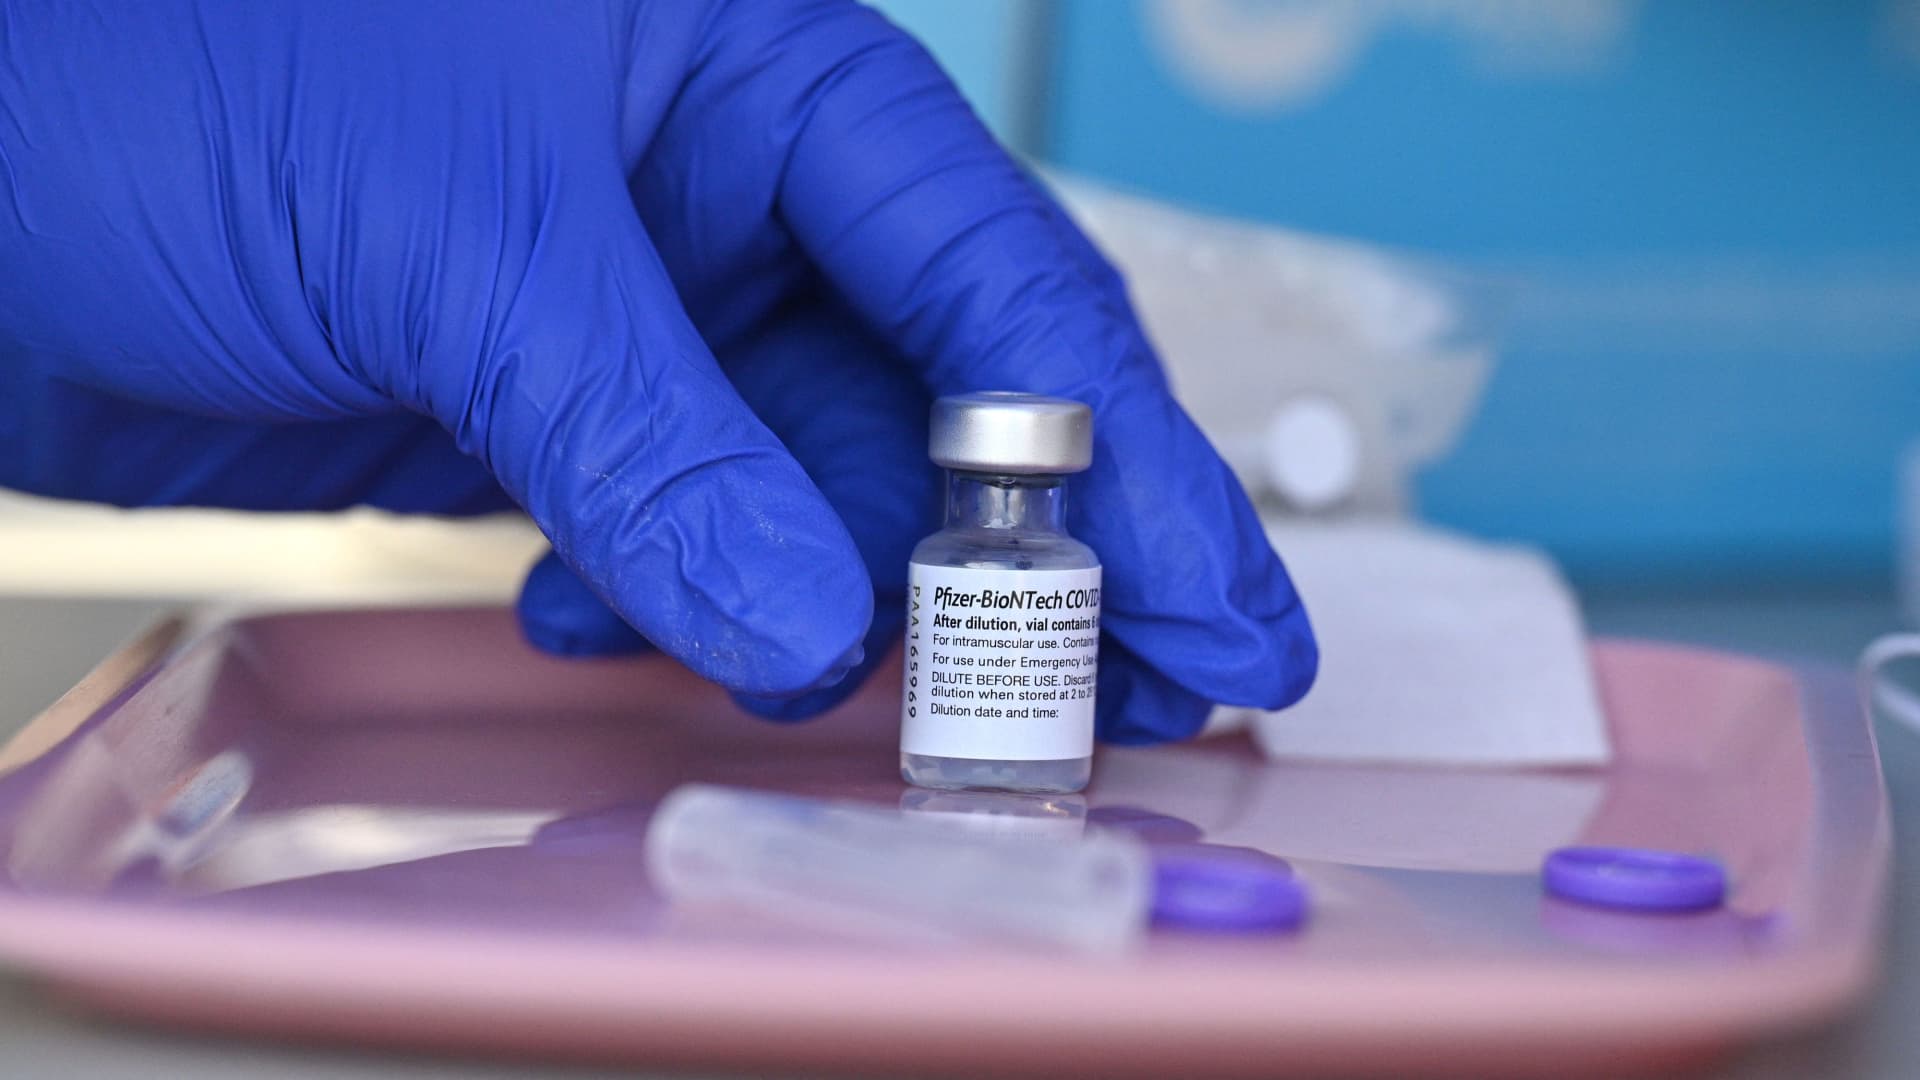 A nurse reaches for a vial of Pfizer-BioNTech Covid-19 vaccine at a pop up vaccine clinic in the Arleta neighborhood of Los Angeles, California, August 23, 2021.